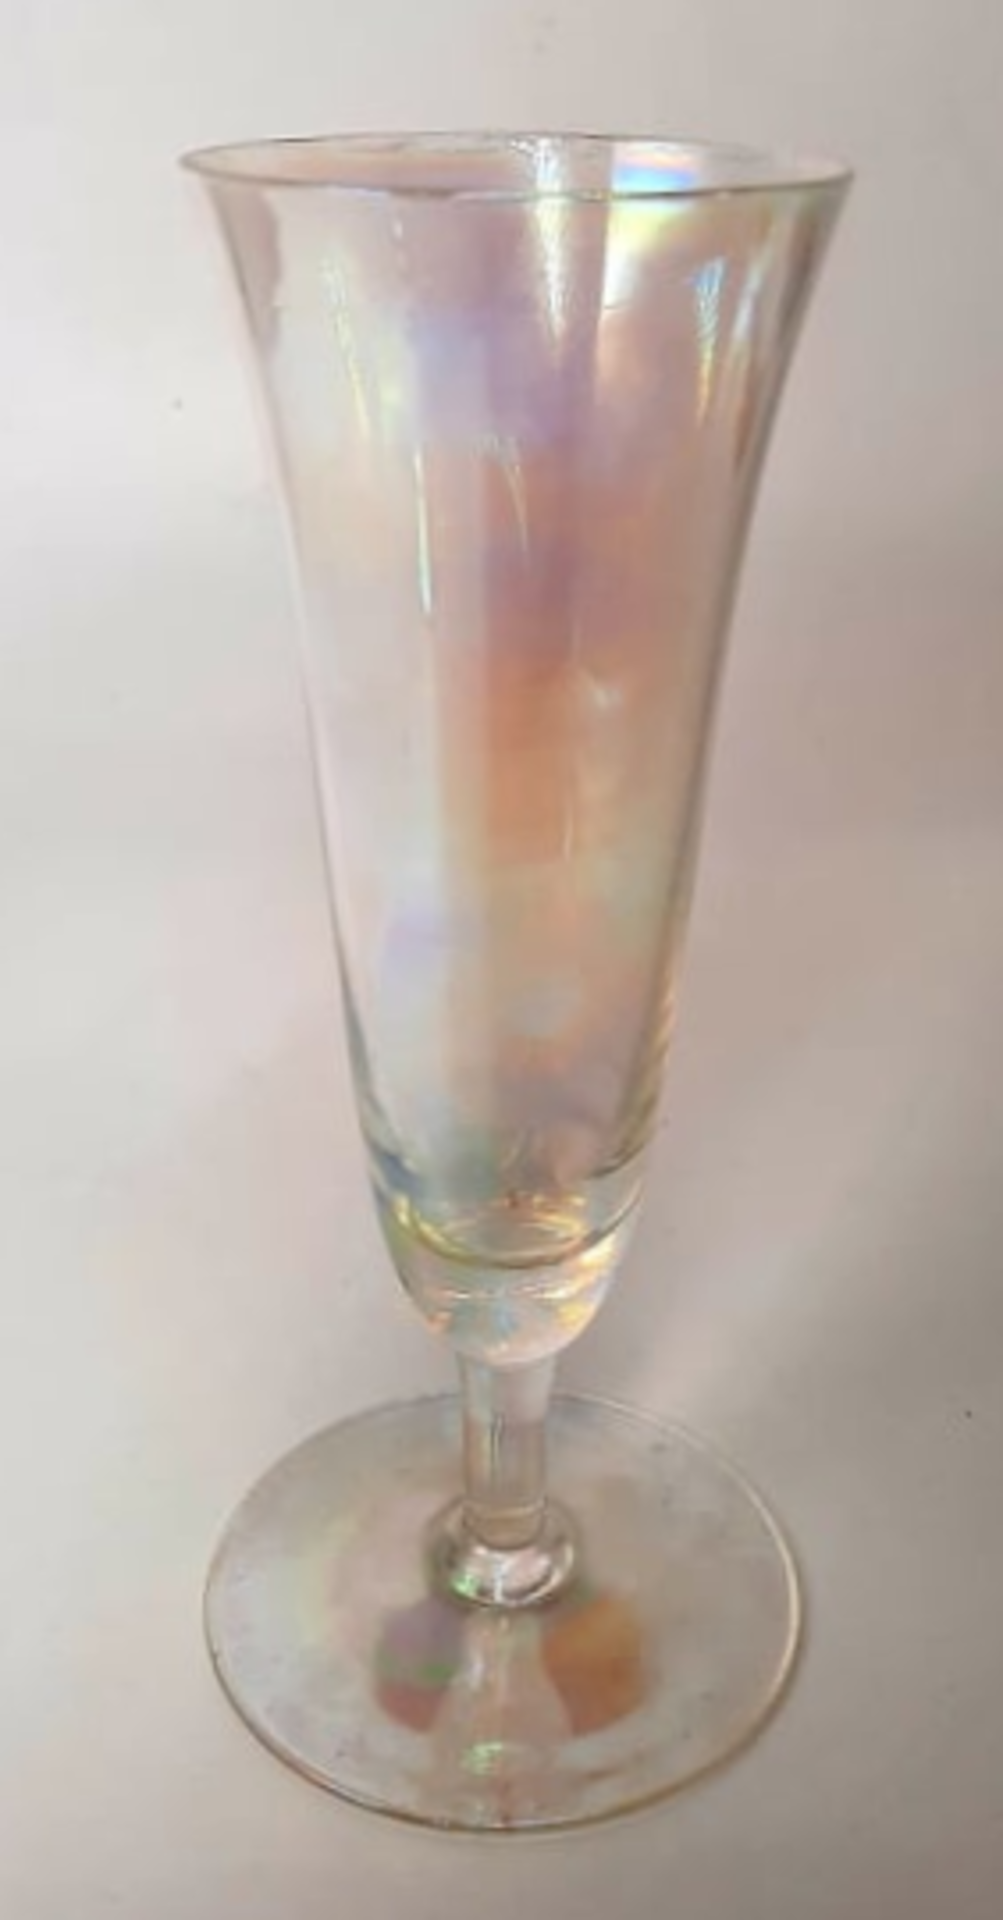 4 Sparking Wine Glass | irredescent - Image 2 of 3